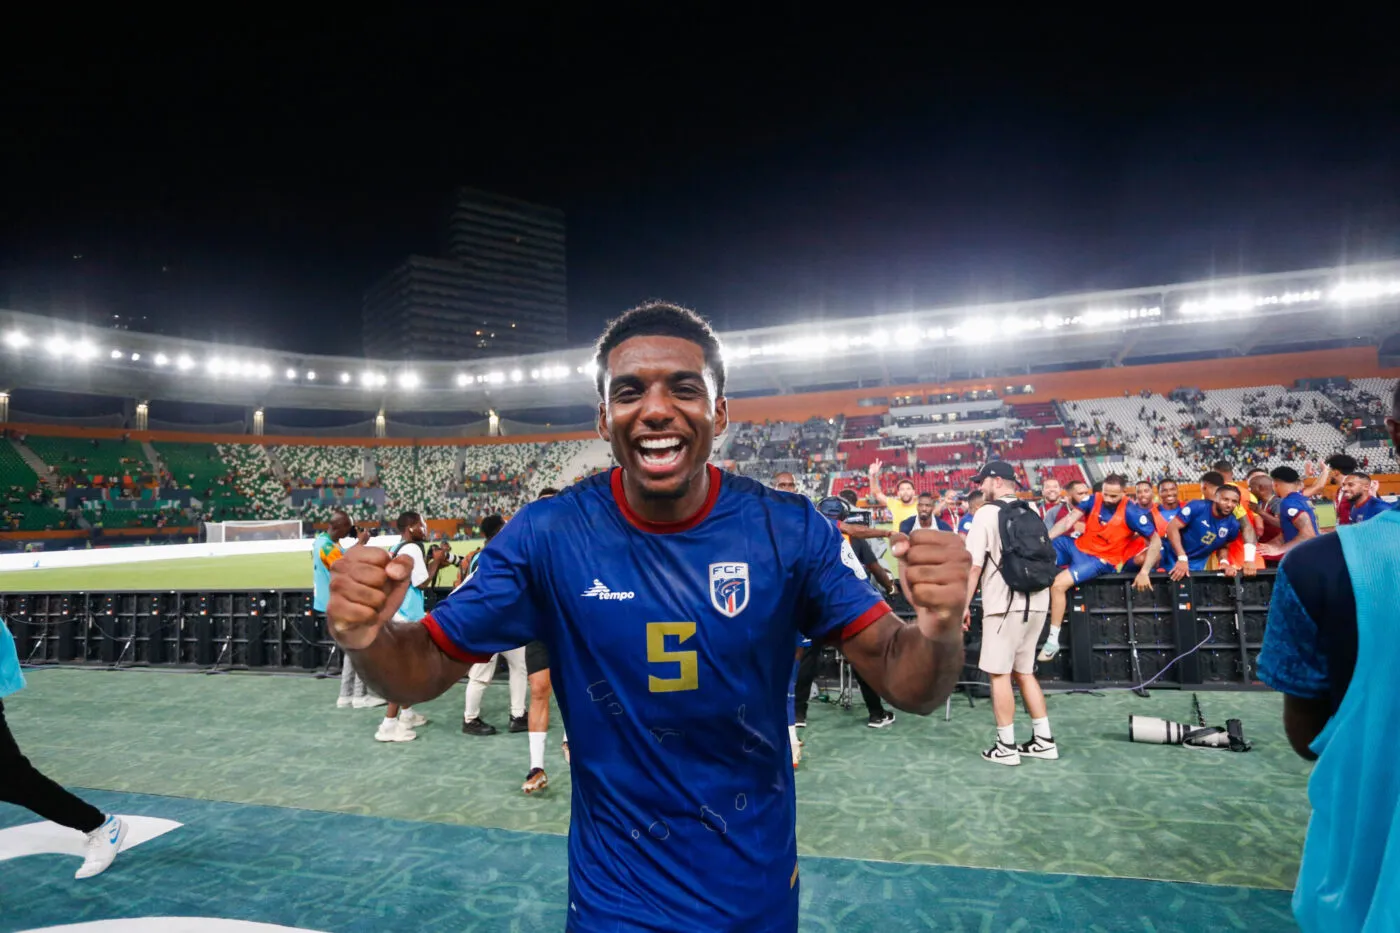 Logan Costa of Cape Verde during the Africa Nations Cup 2024 match between Ghana and Cape Verde on January 14, 2023 at Le Felicia stadium in Abidjan, Ivory Coast.

(Photo by GPG / Icon Sport)